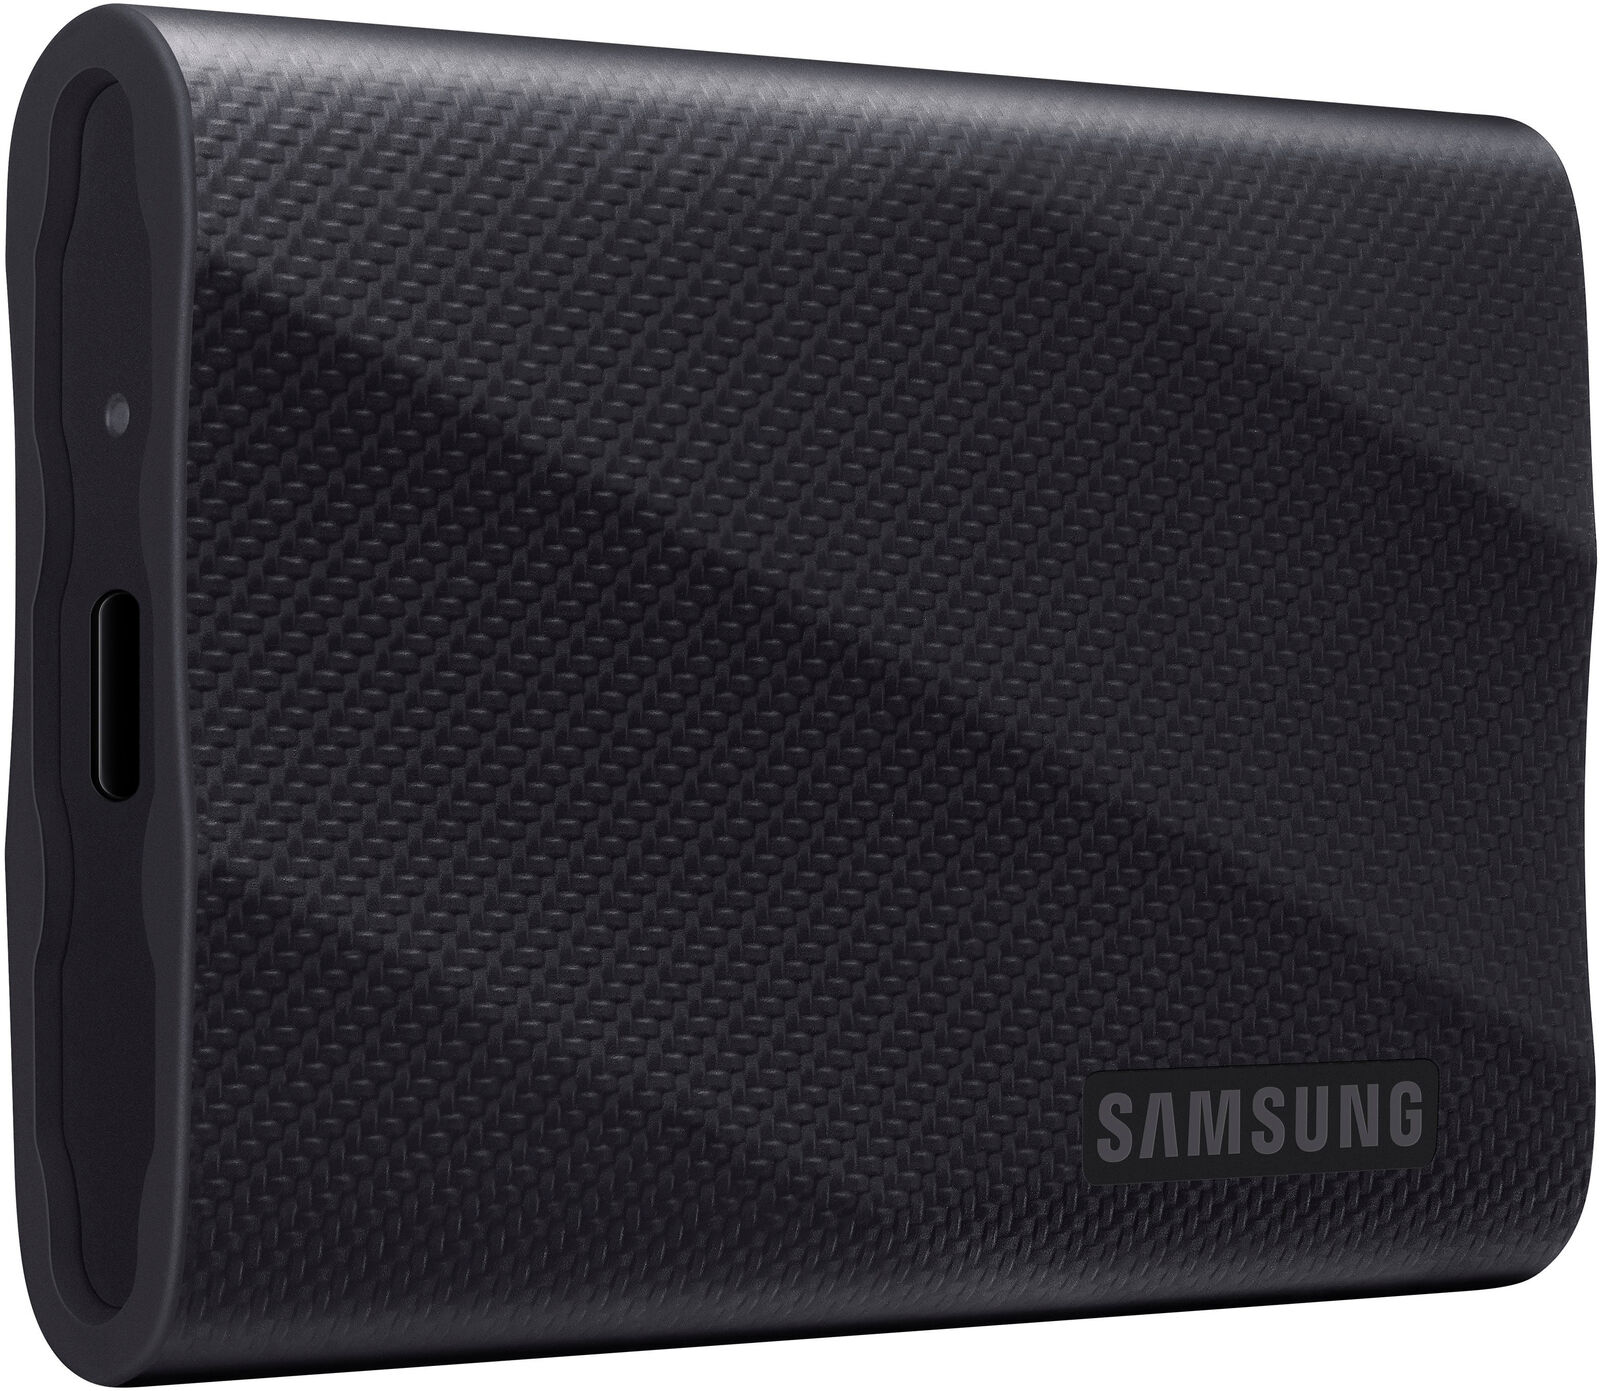 Samsung - Geek Squad Certified Refurbished T9 Portable SSD 4TB, Up to 2,000MB...